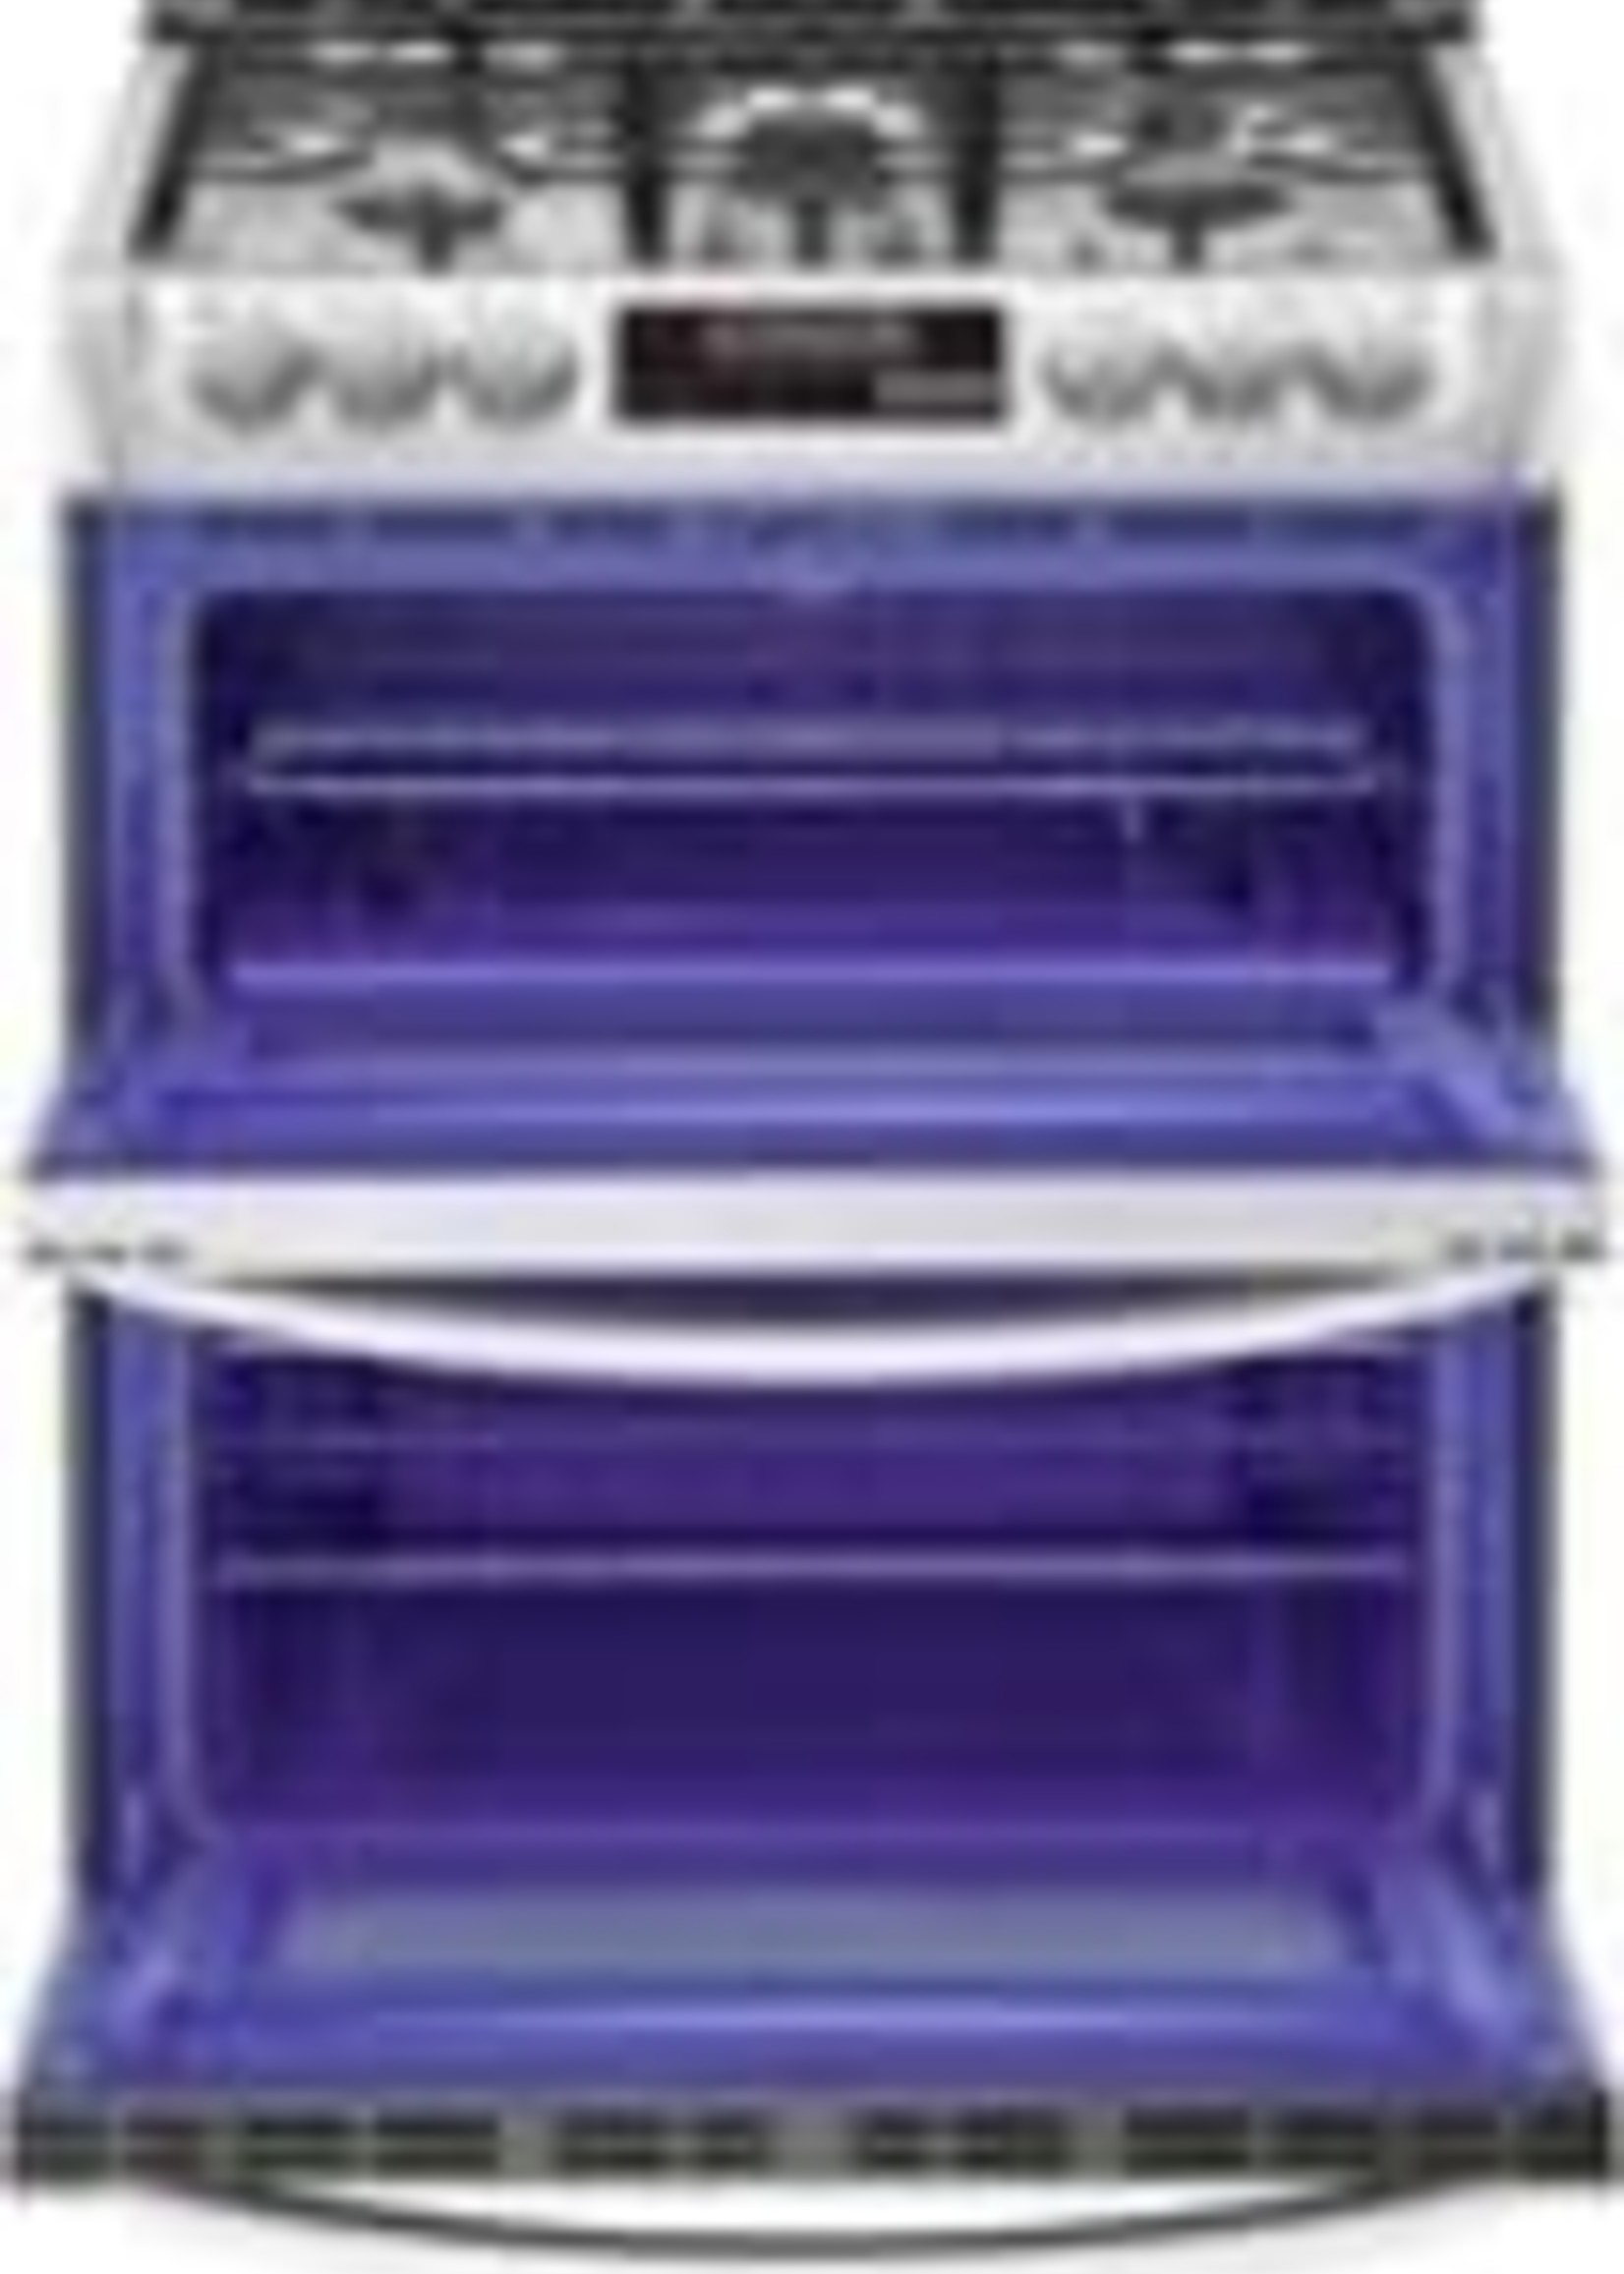 LG *LG  LTG4715ST   6.9 cu. ft. Smart Double Oven Slide In Gas Range with ProBake Convection and Wi-Fi in Stainless Steel